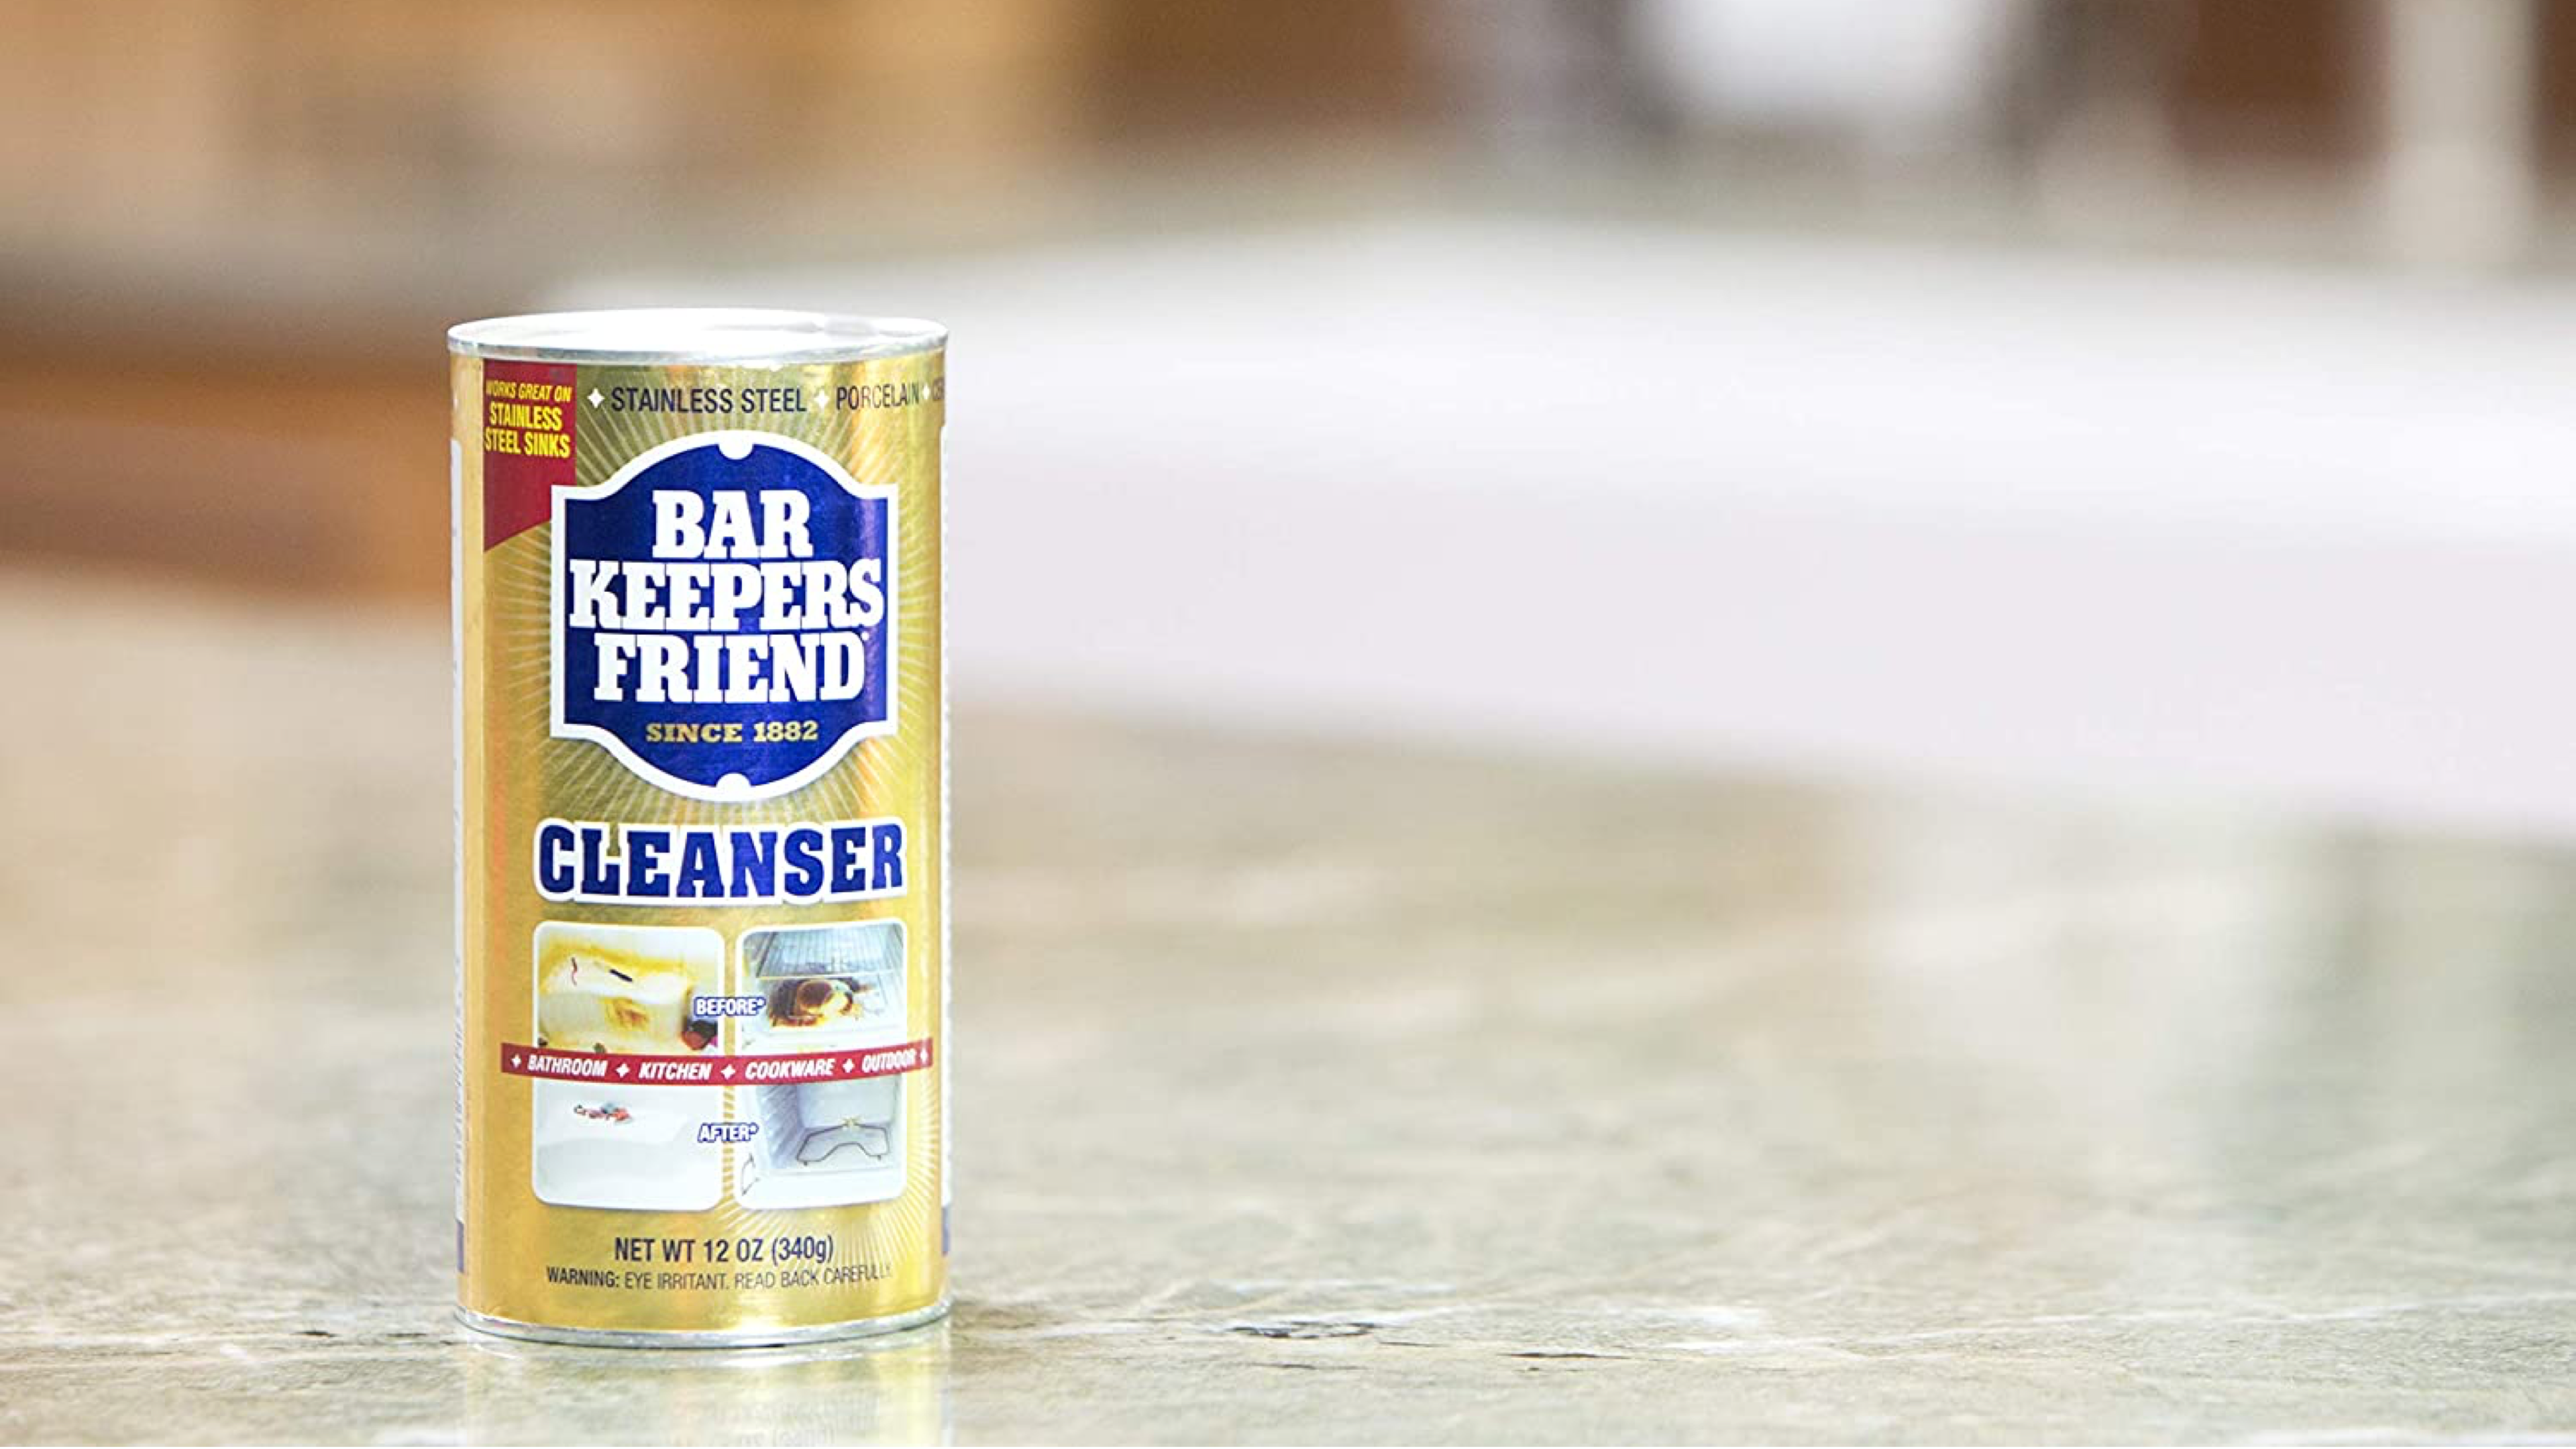 powdered cleanser that can fight tough caked on stains and works on a ton of different surfaces